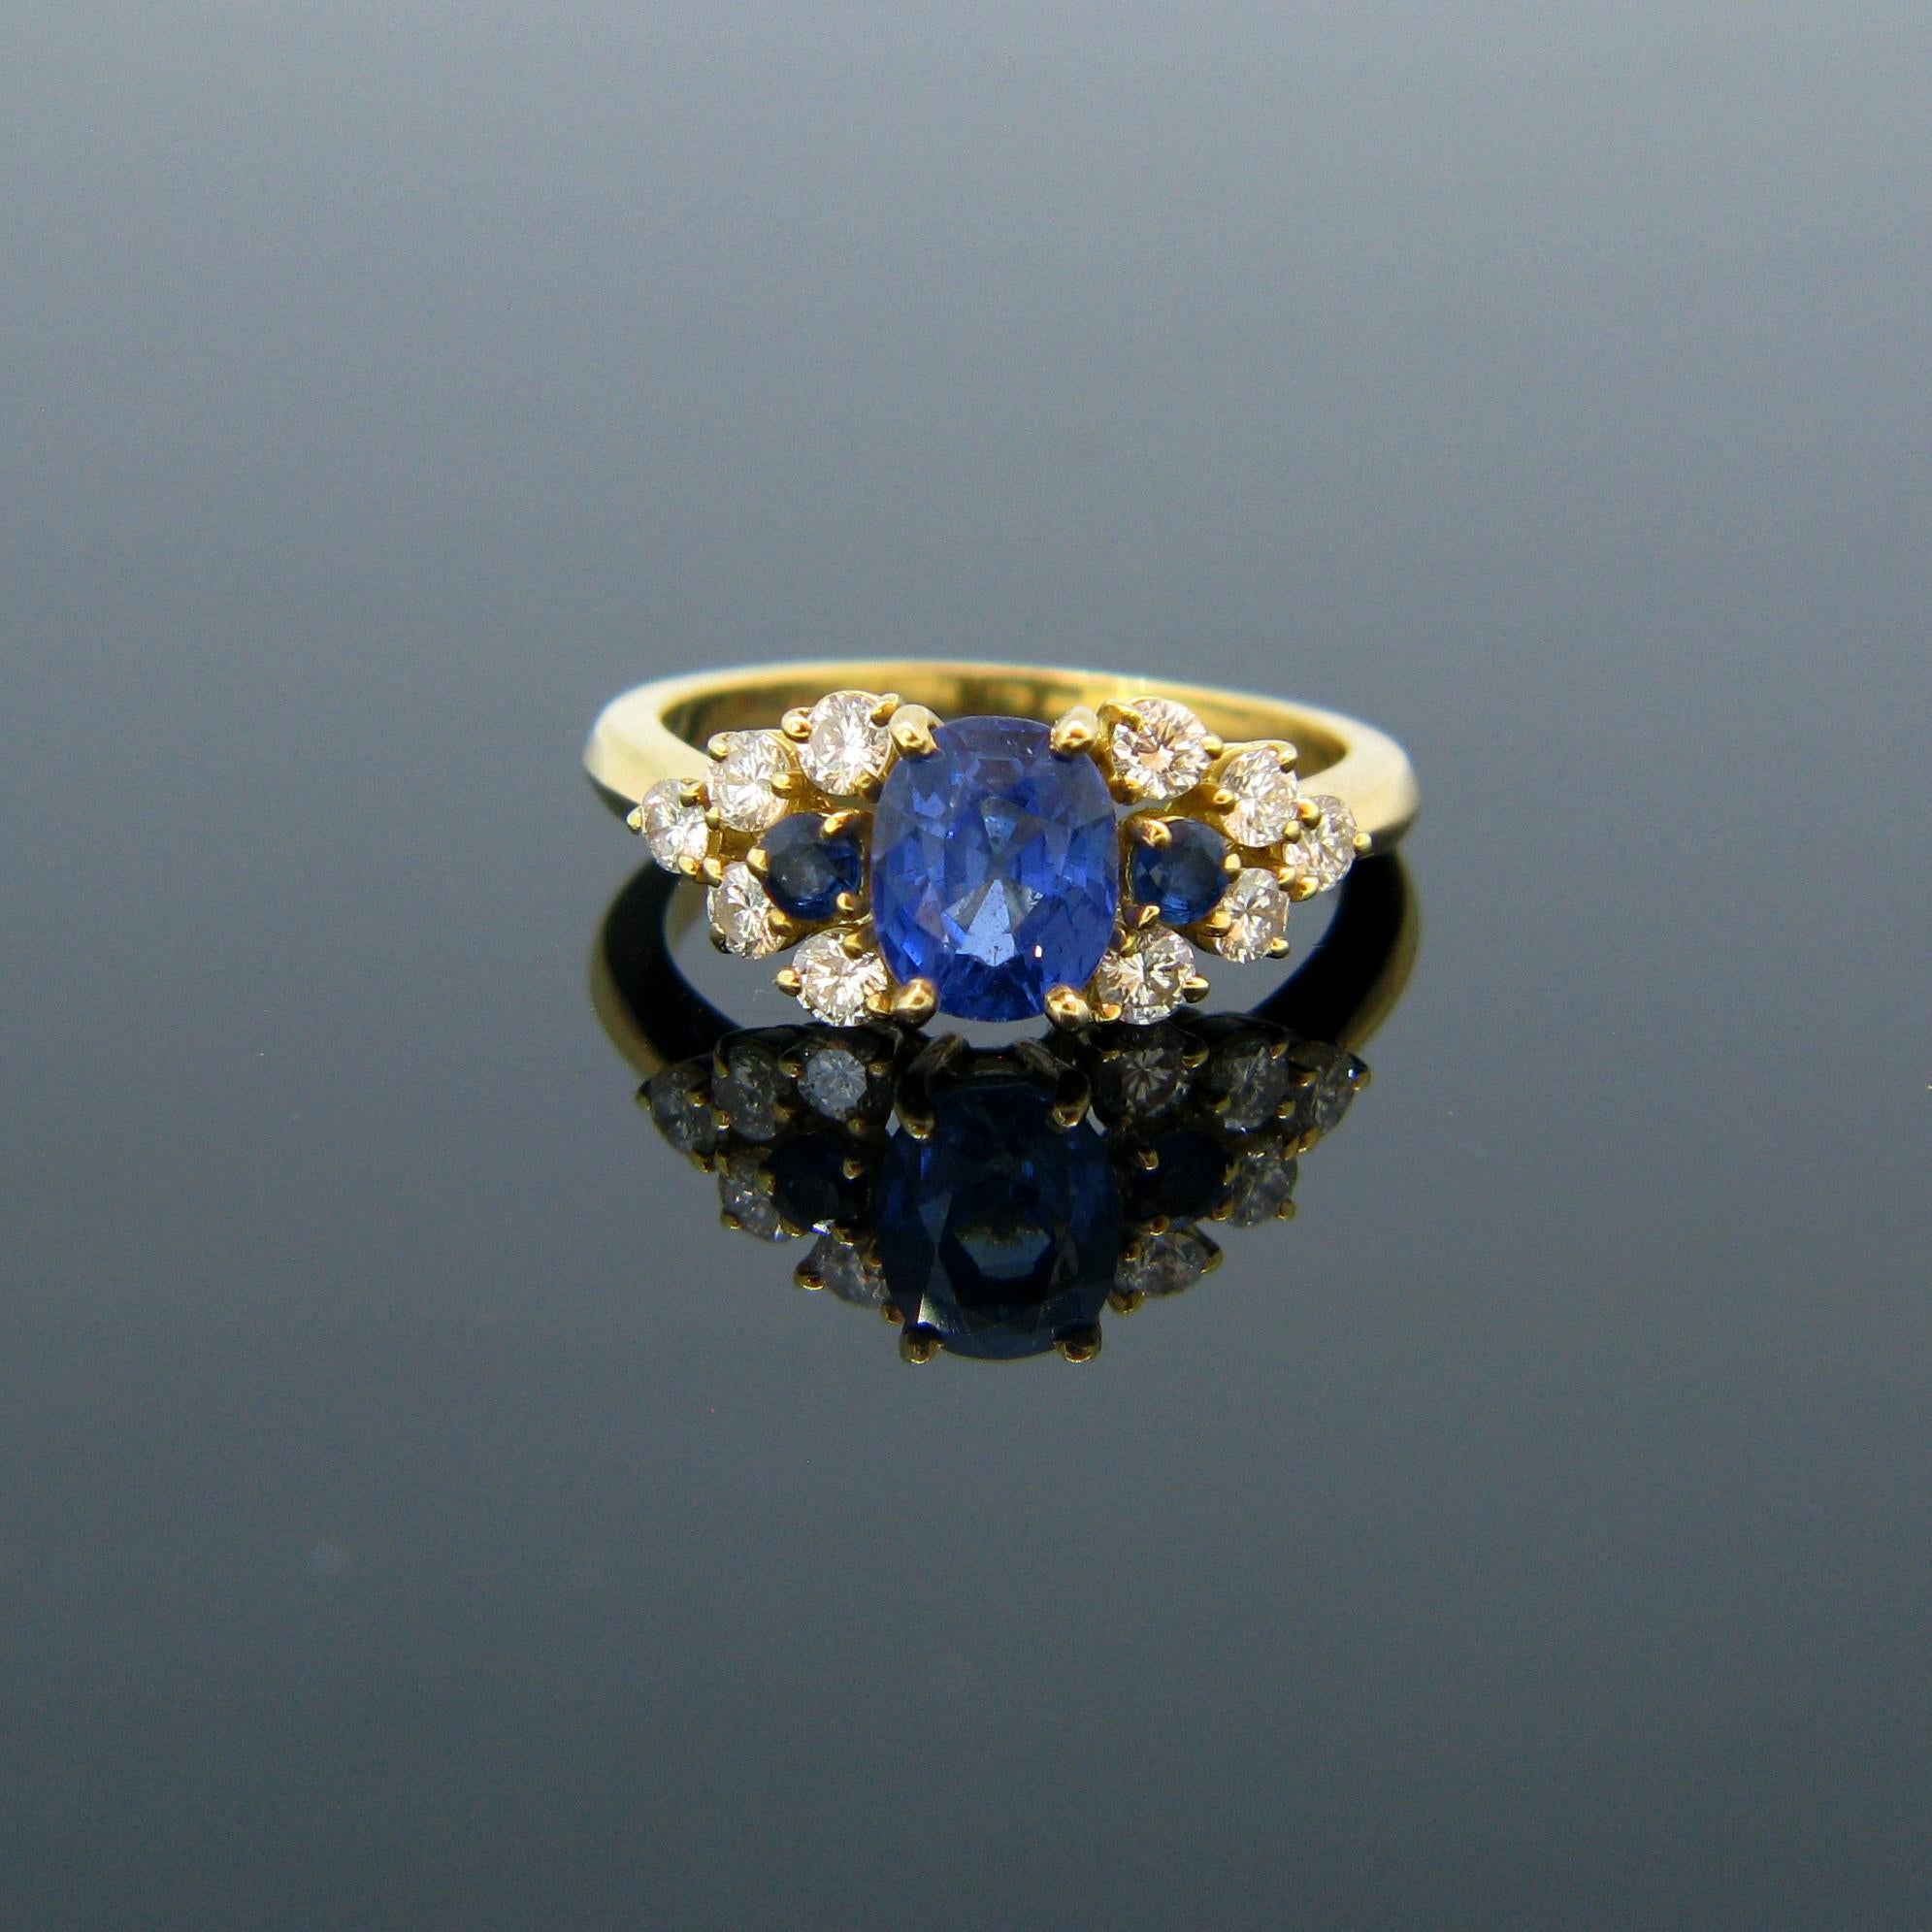 This beautiful ring is set with an oval cut natural sapphire weighing approximately 1.65ct. The sapphire is a Ceylon with no indications of heating. It is also set with two sapphires and 10 round brilliant cut diamonds. It is fully made in 18kt